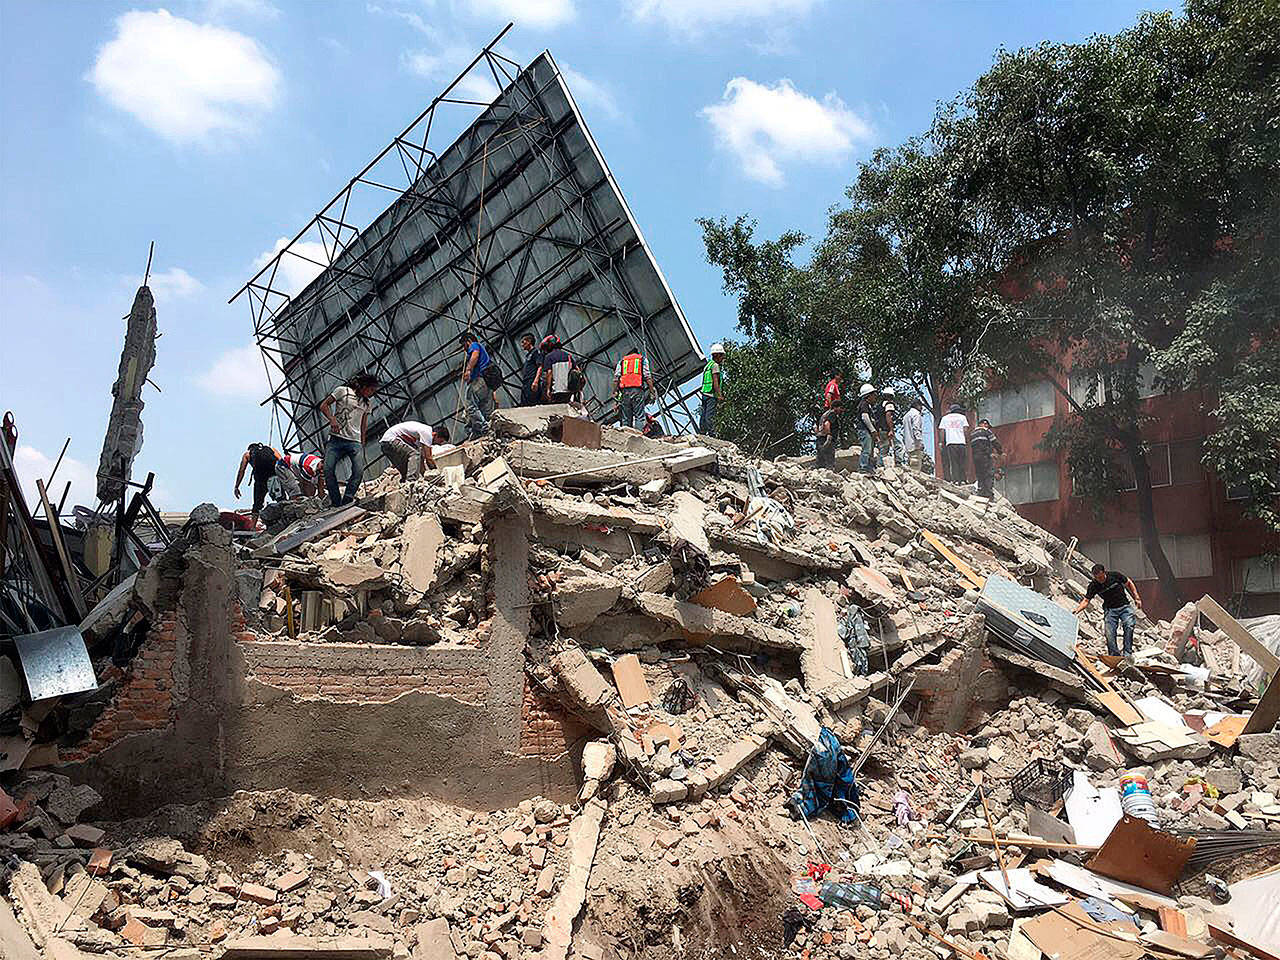 A powerful 7.1-magnitude earthquake struck Mexico City on Tuesday, collapsing buildings and sending thousands fleeing into streets exactly 32 years on the anniversary of the 1985 massive earthquake. (Prensa Internacional/Zuma Press/TNS)